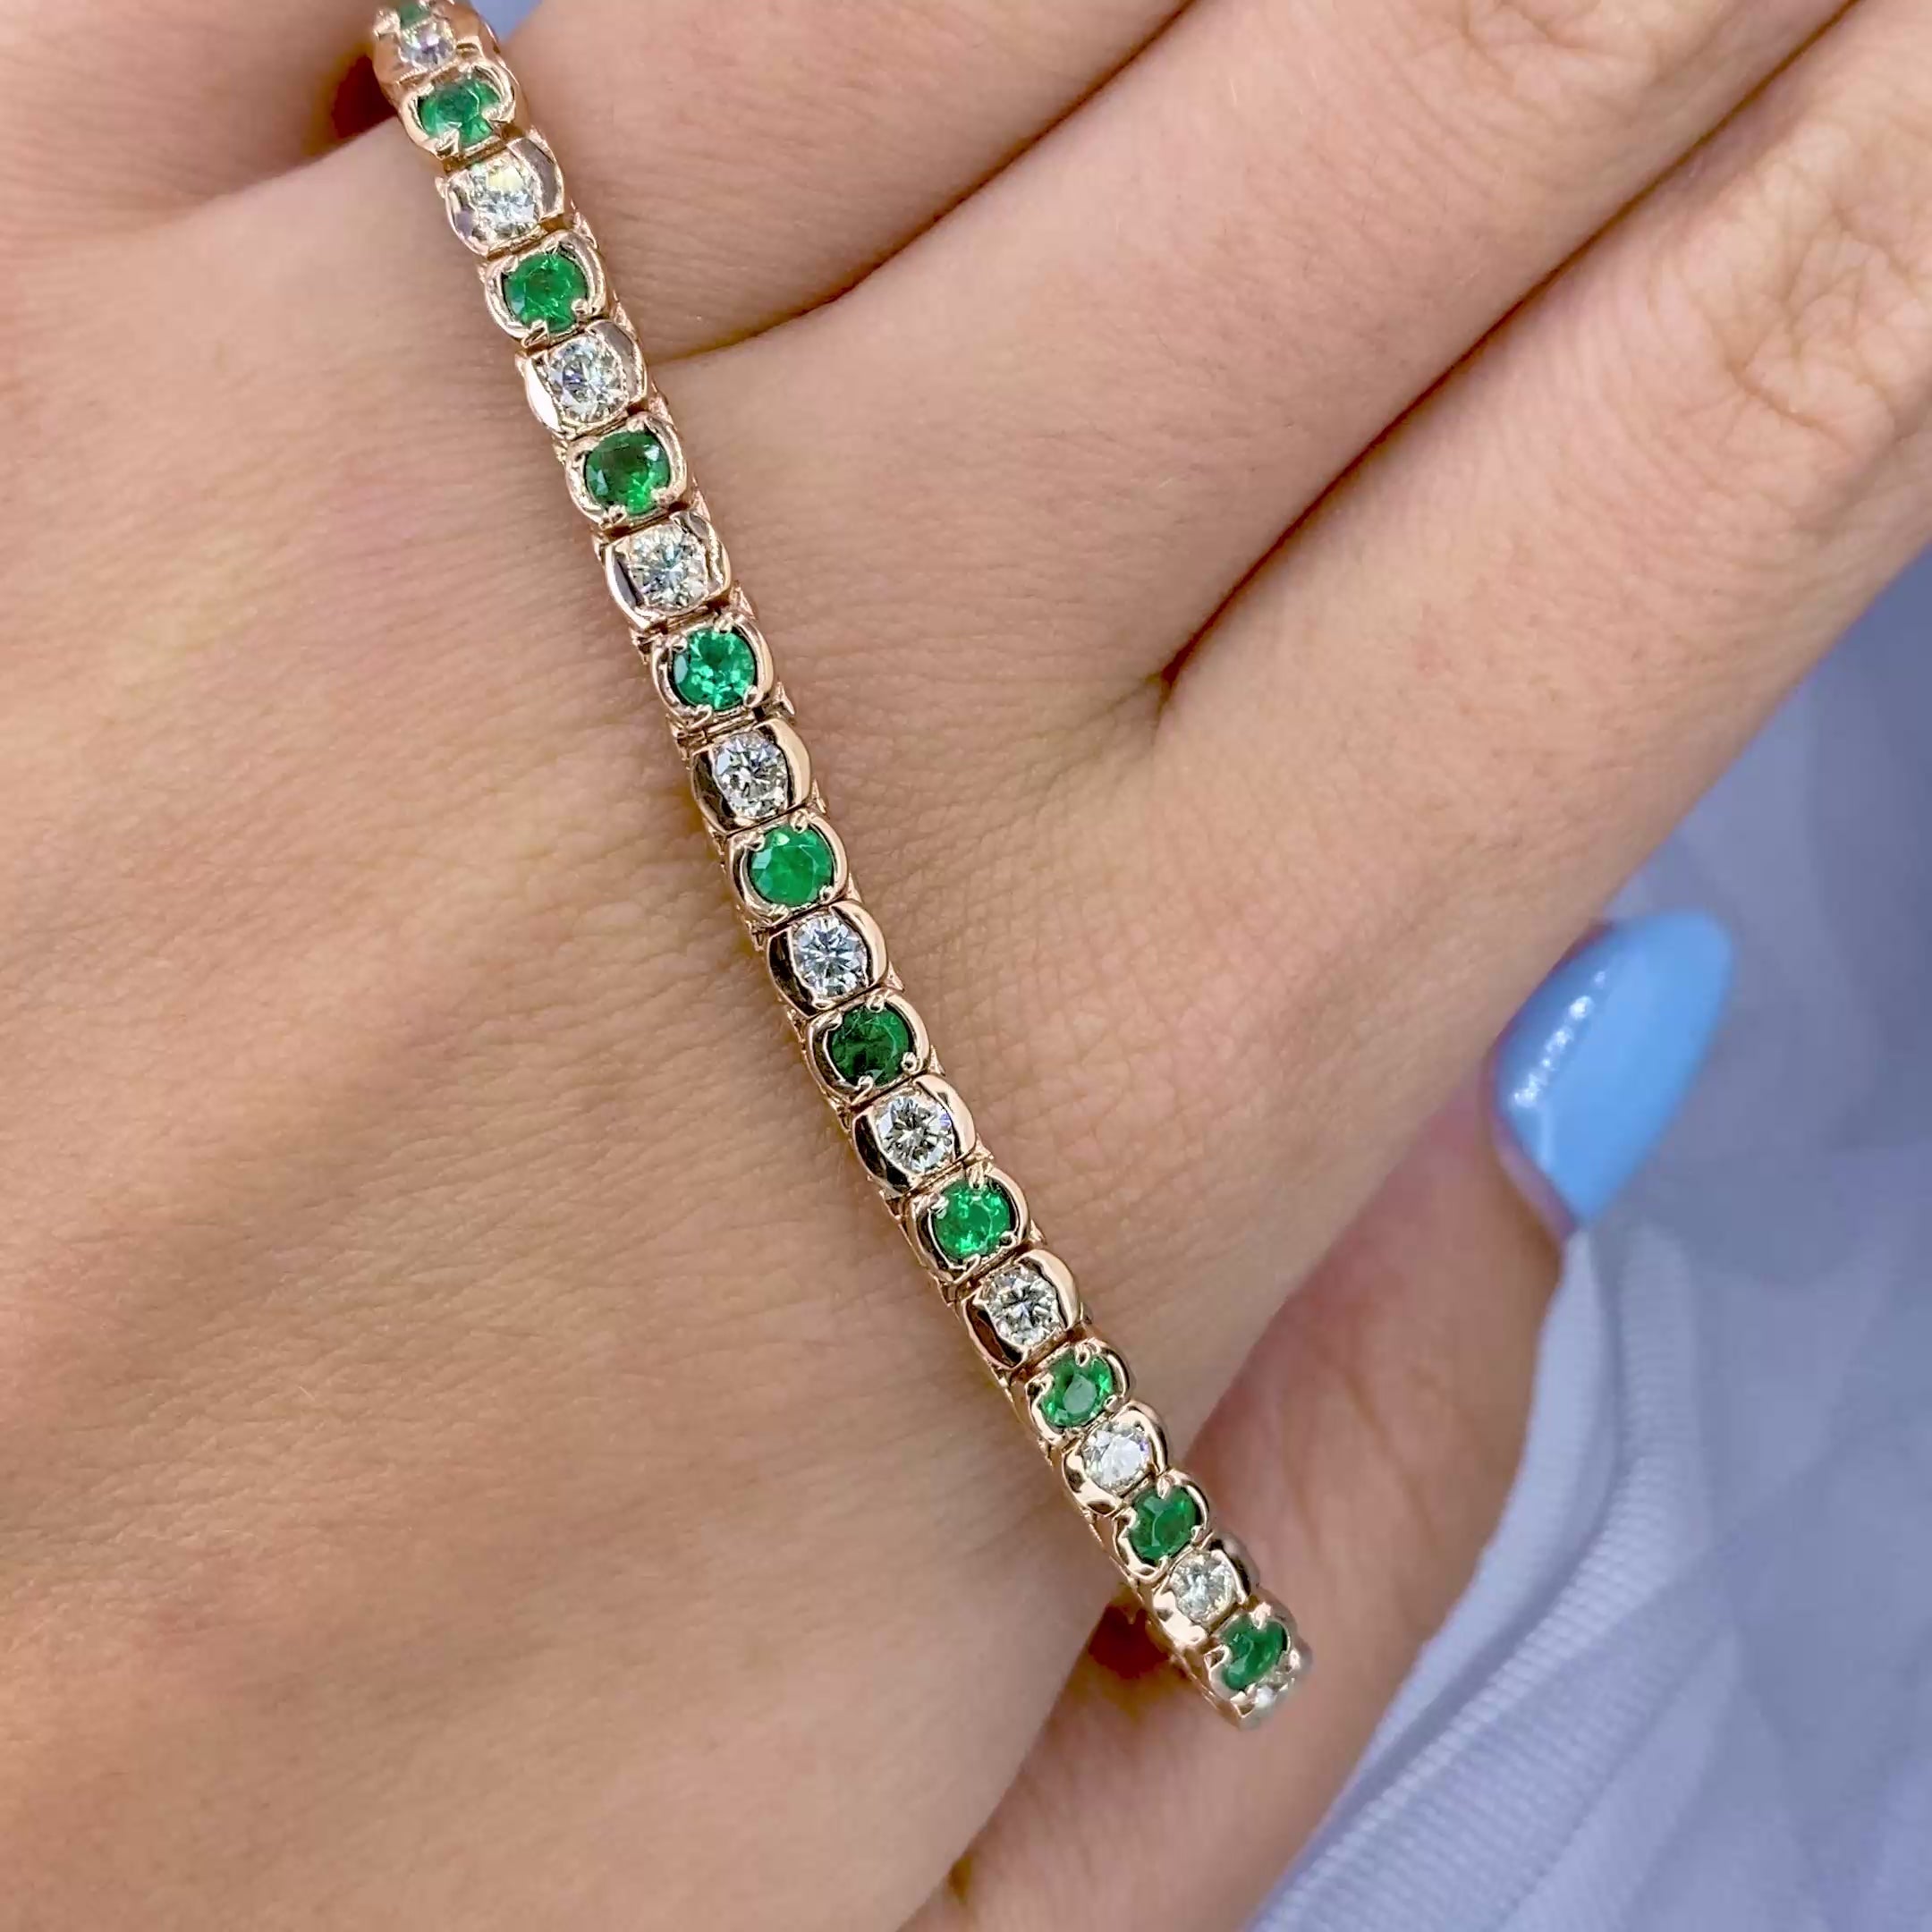 Special 6.00 CT Round Cut Diamond and Green Emerald Tennis Bracelet in 14KT Rose Gold